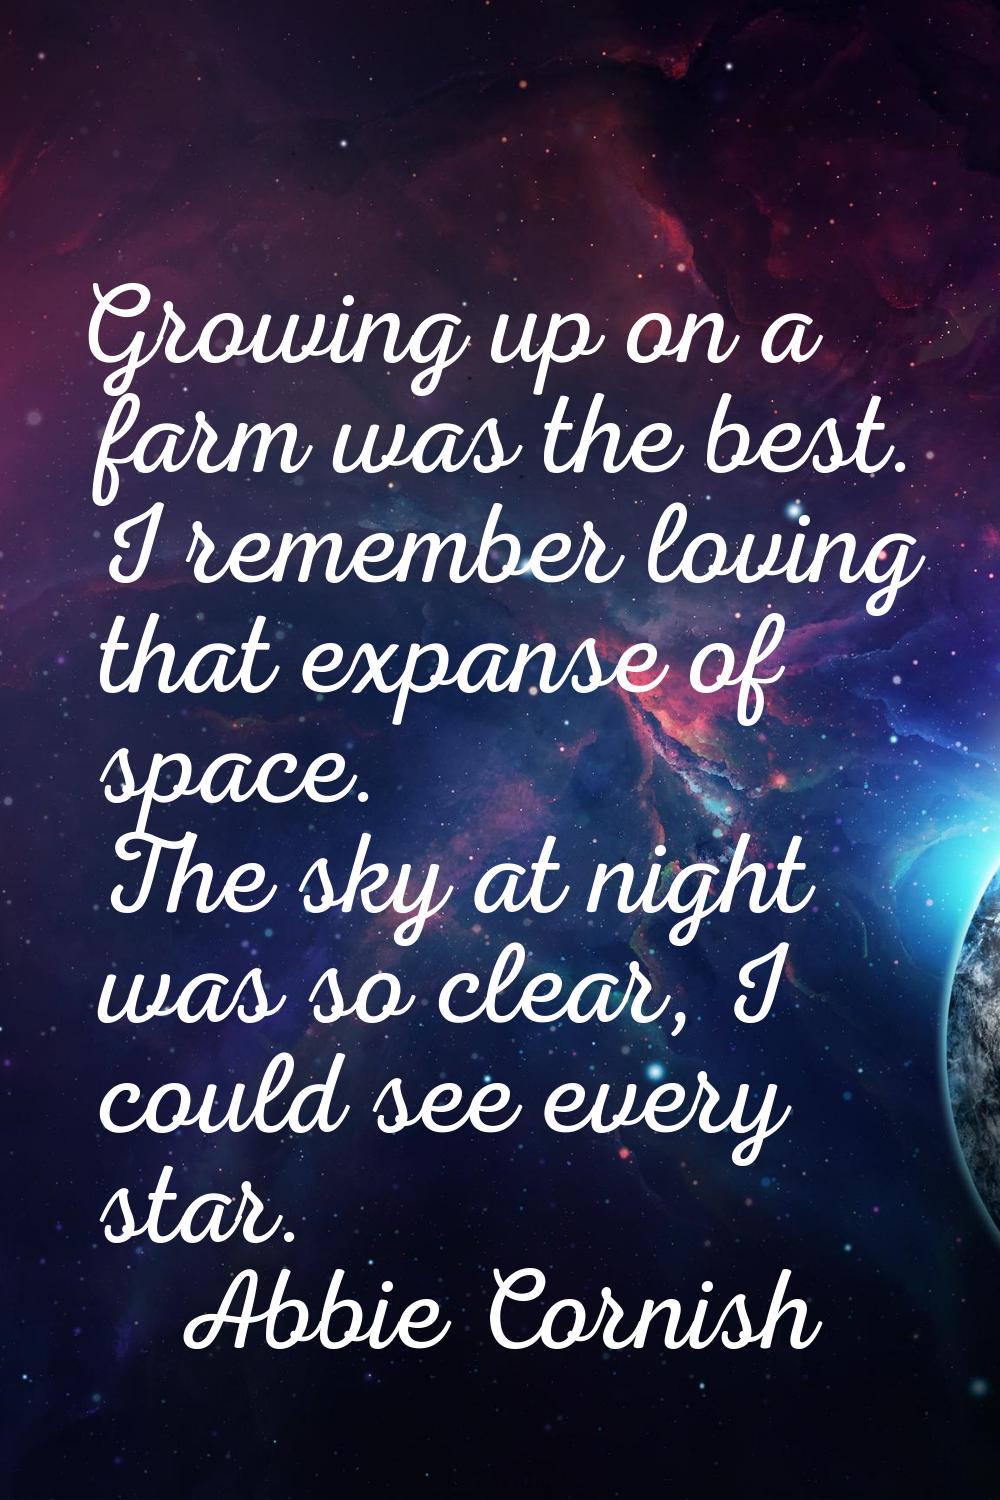 Growing up on a farm was the best. I remember loving that expanse of space. The sky at night was so